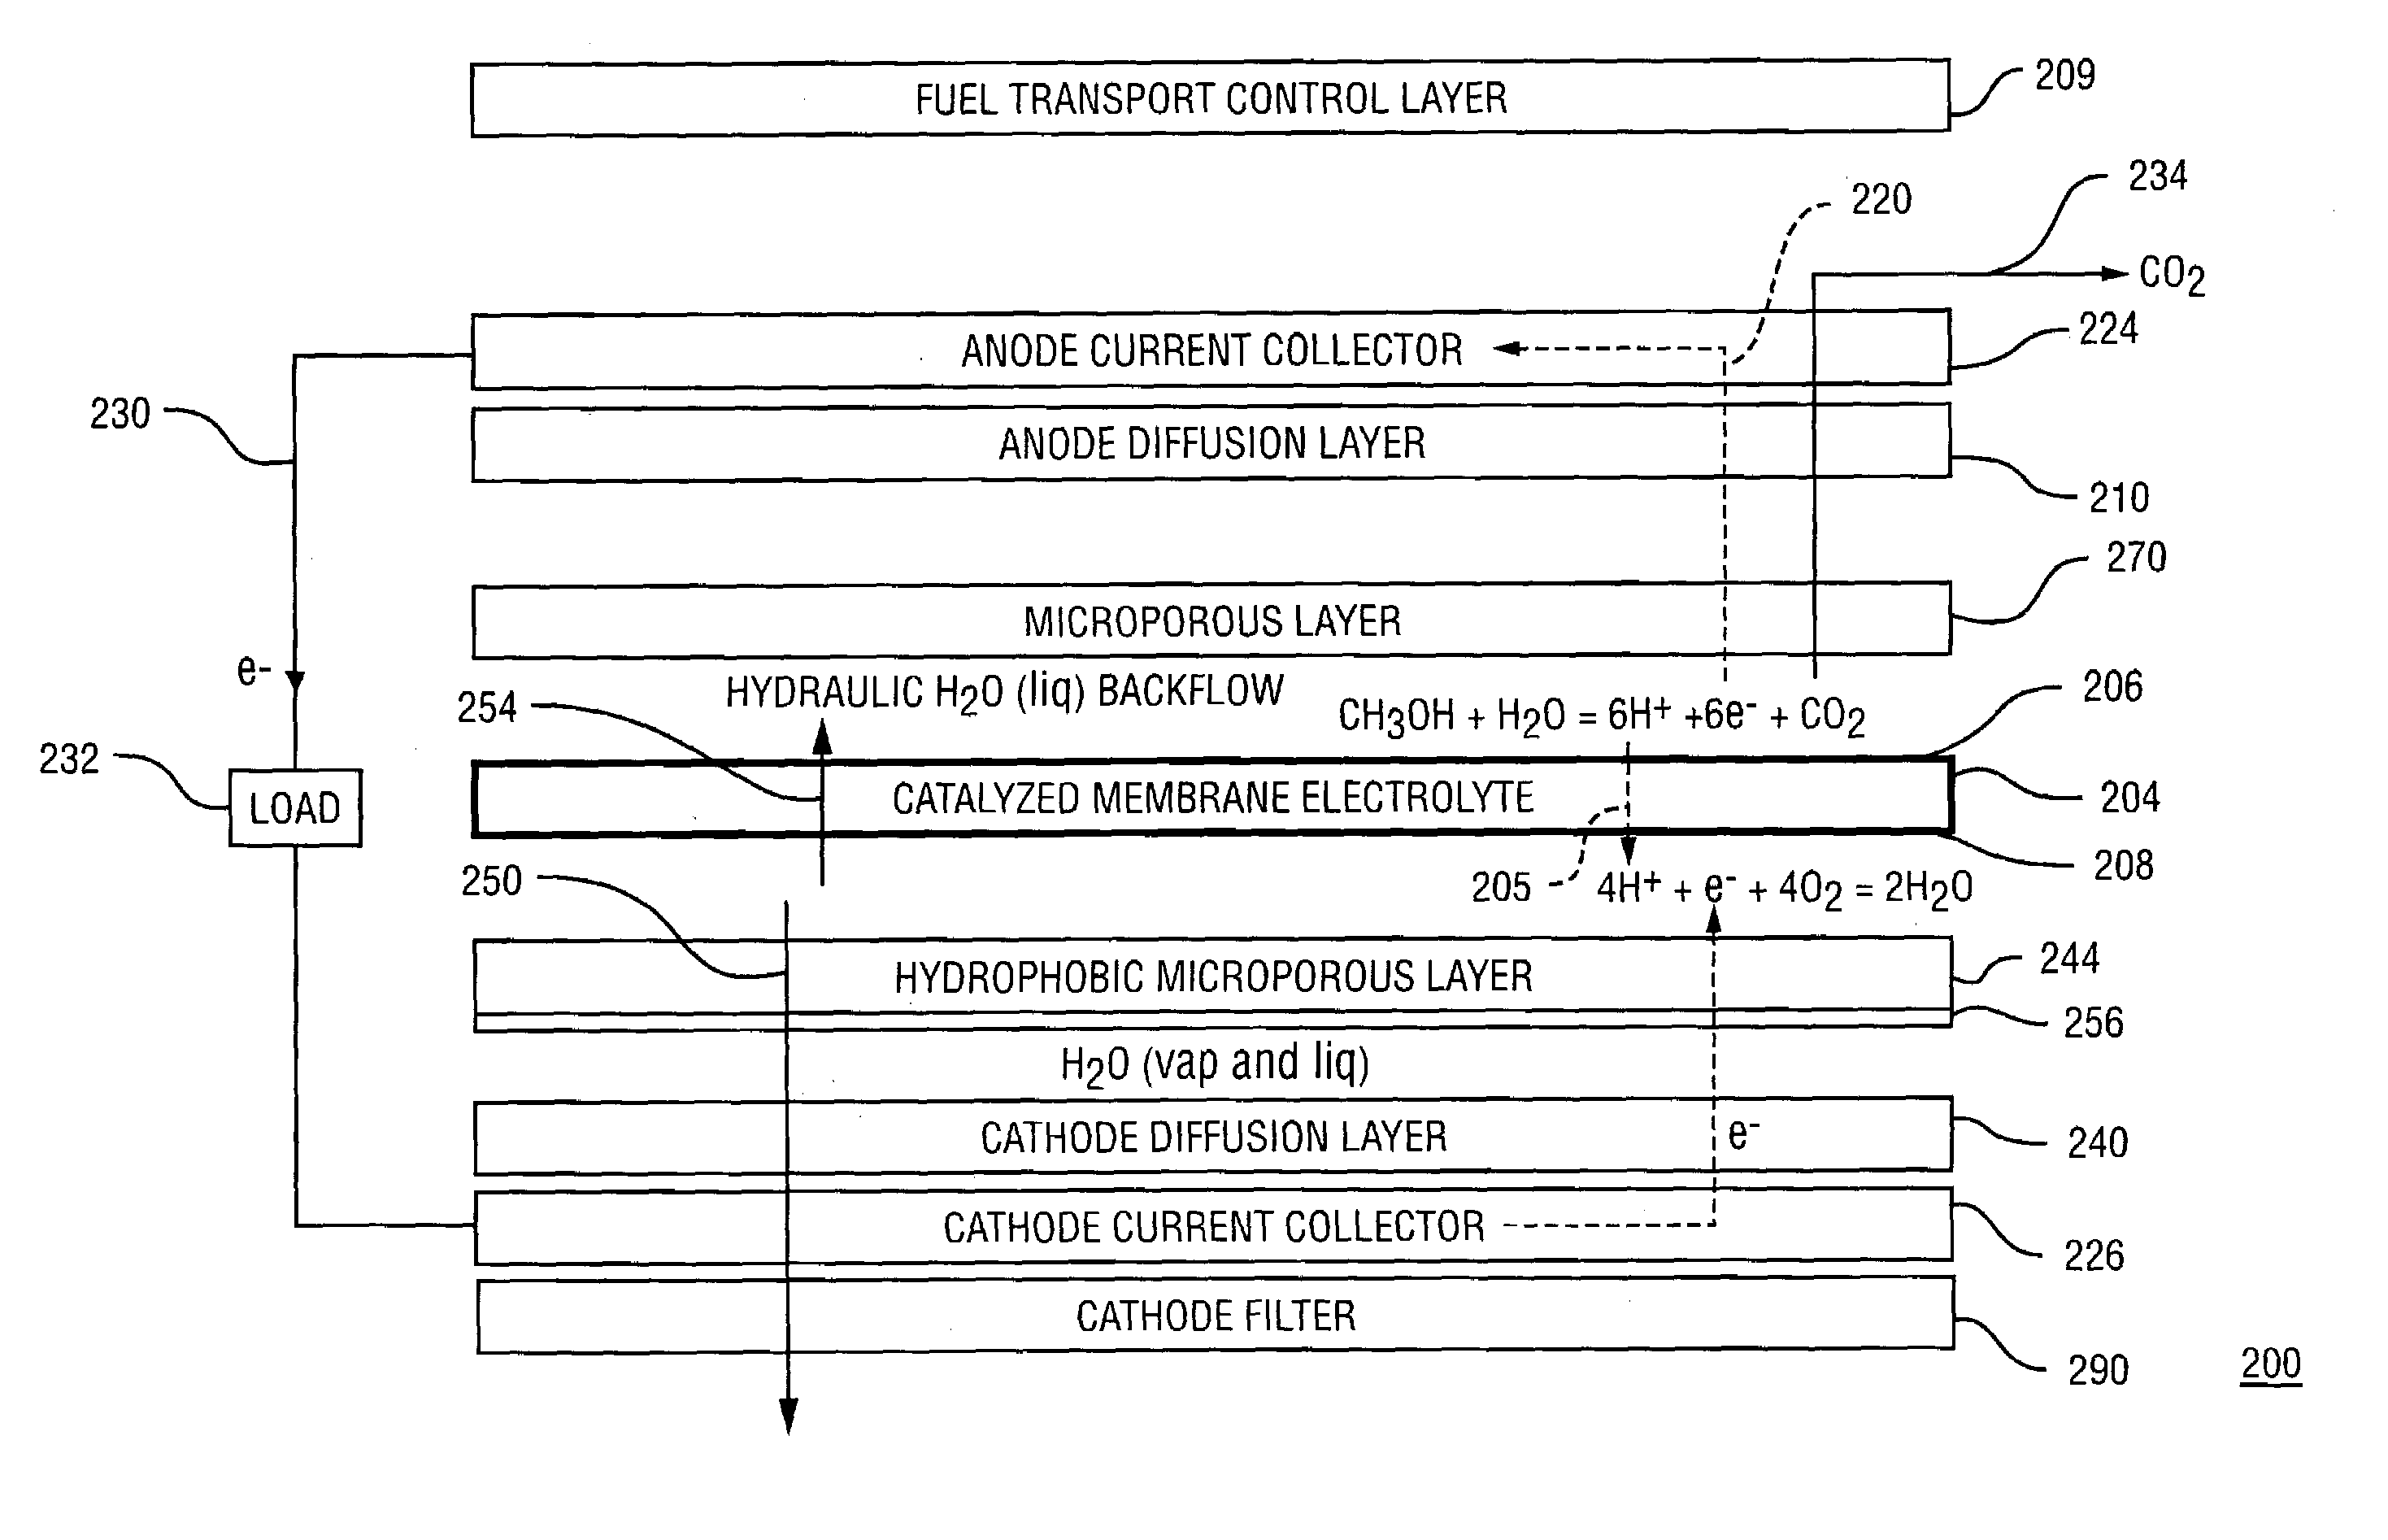 Direct oxidation fuel cell operating with direct feed of concentrated fuel under passive water management